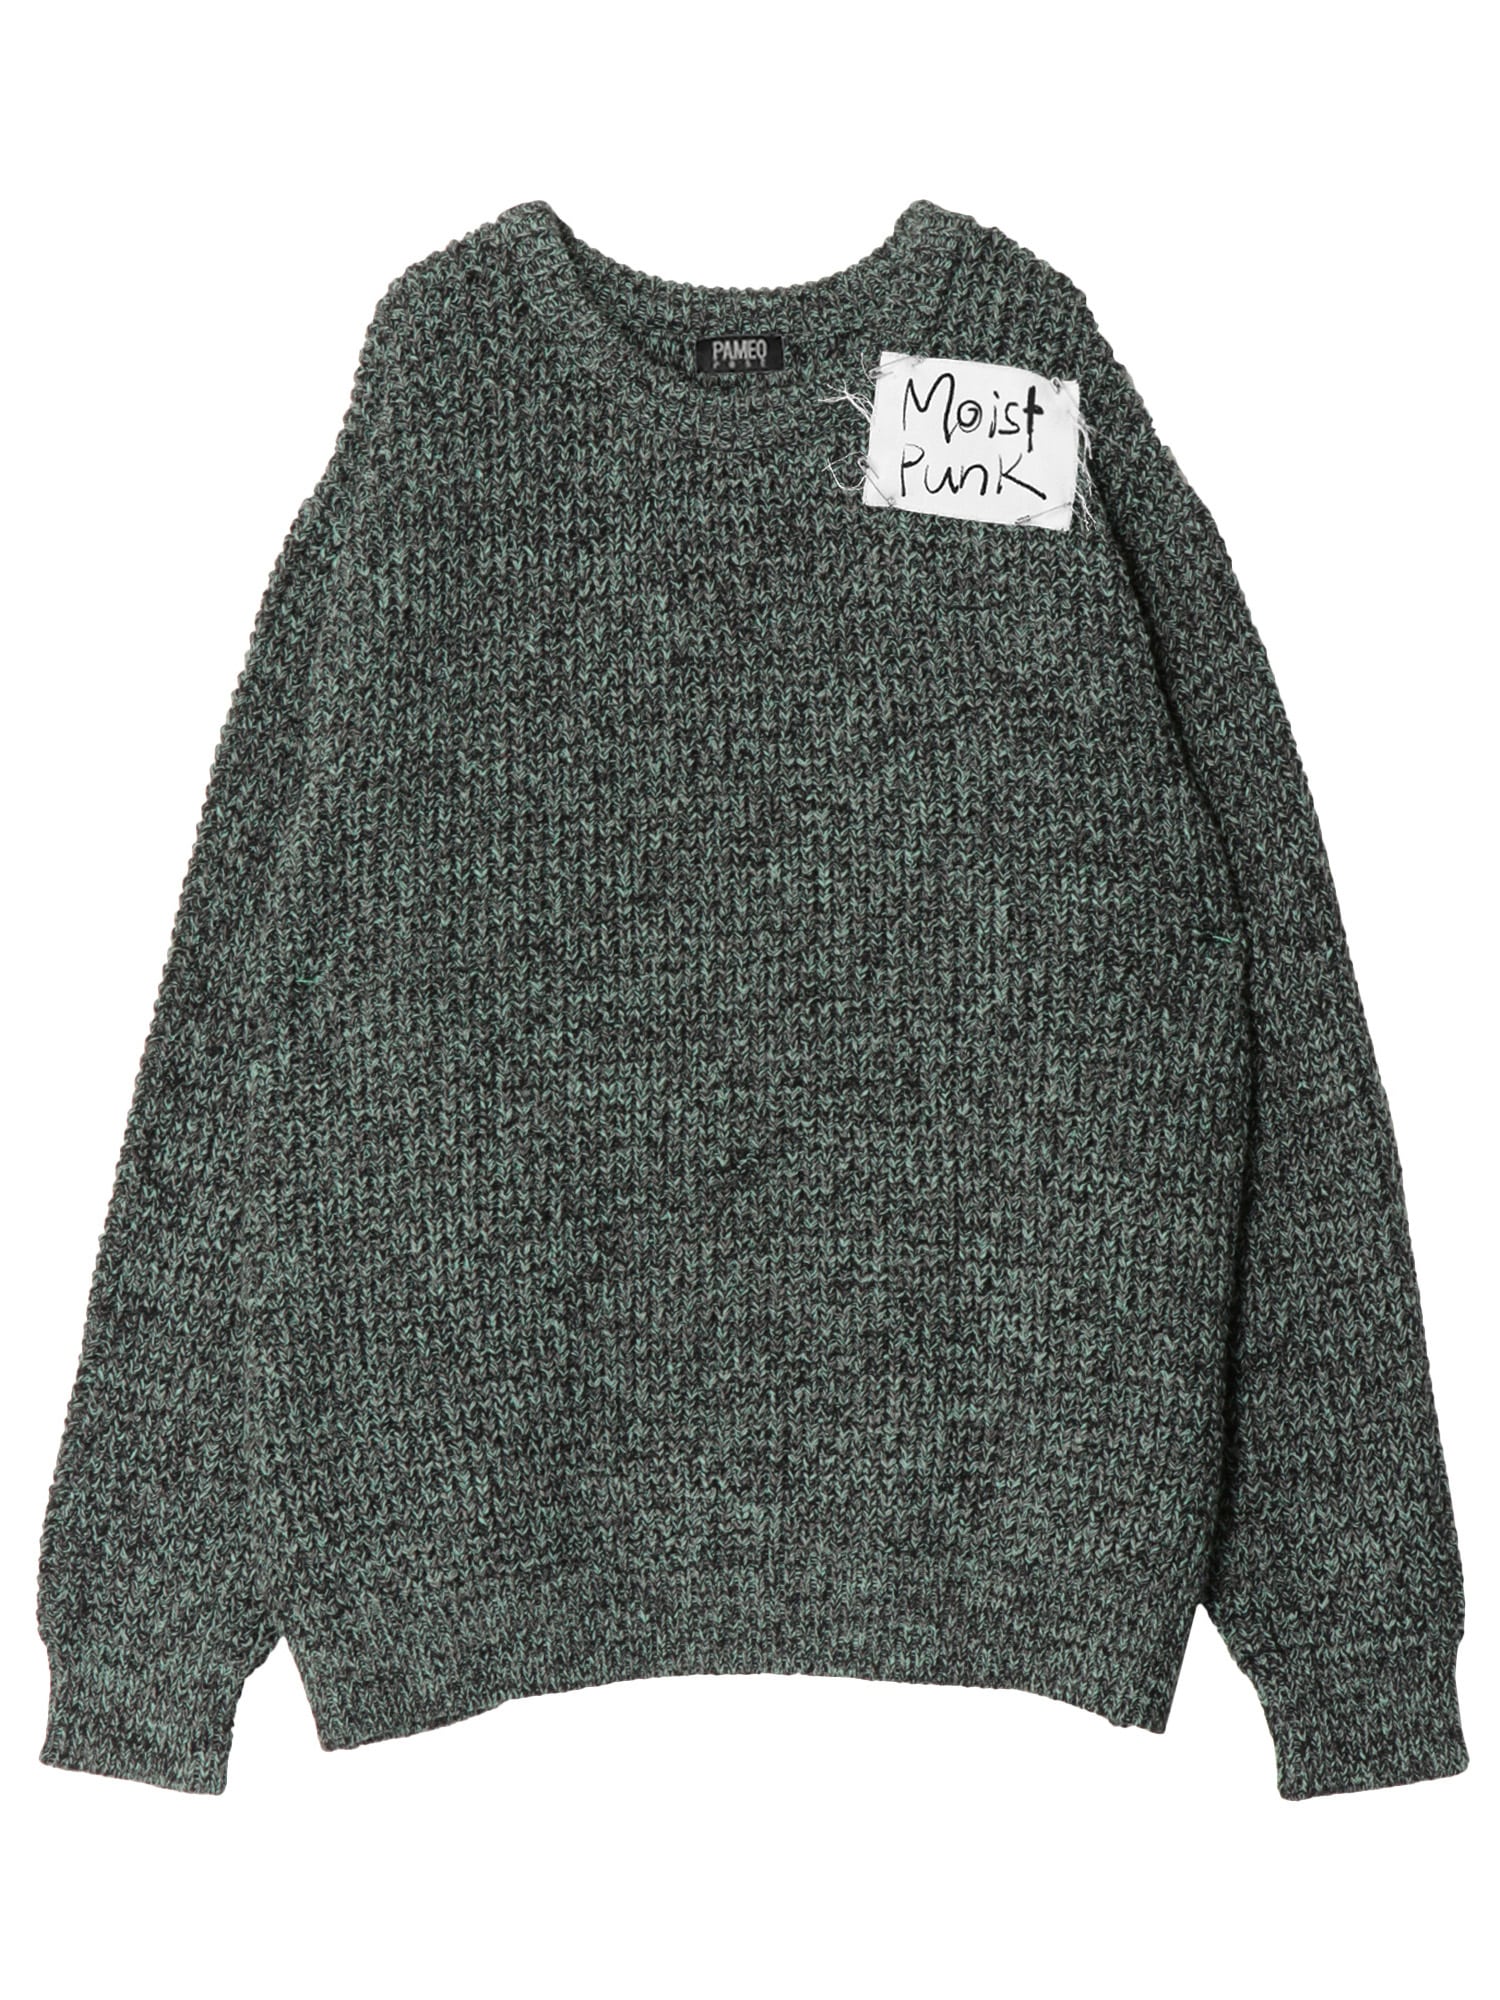 1978 Sweater(F ブラック)｜ PAMEO POSE｜渋谷PARCO | ONLINE PARCO